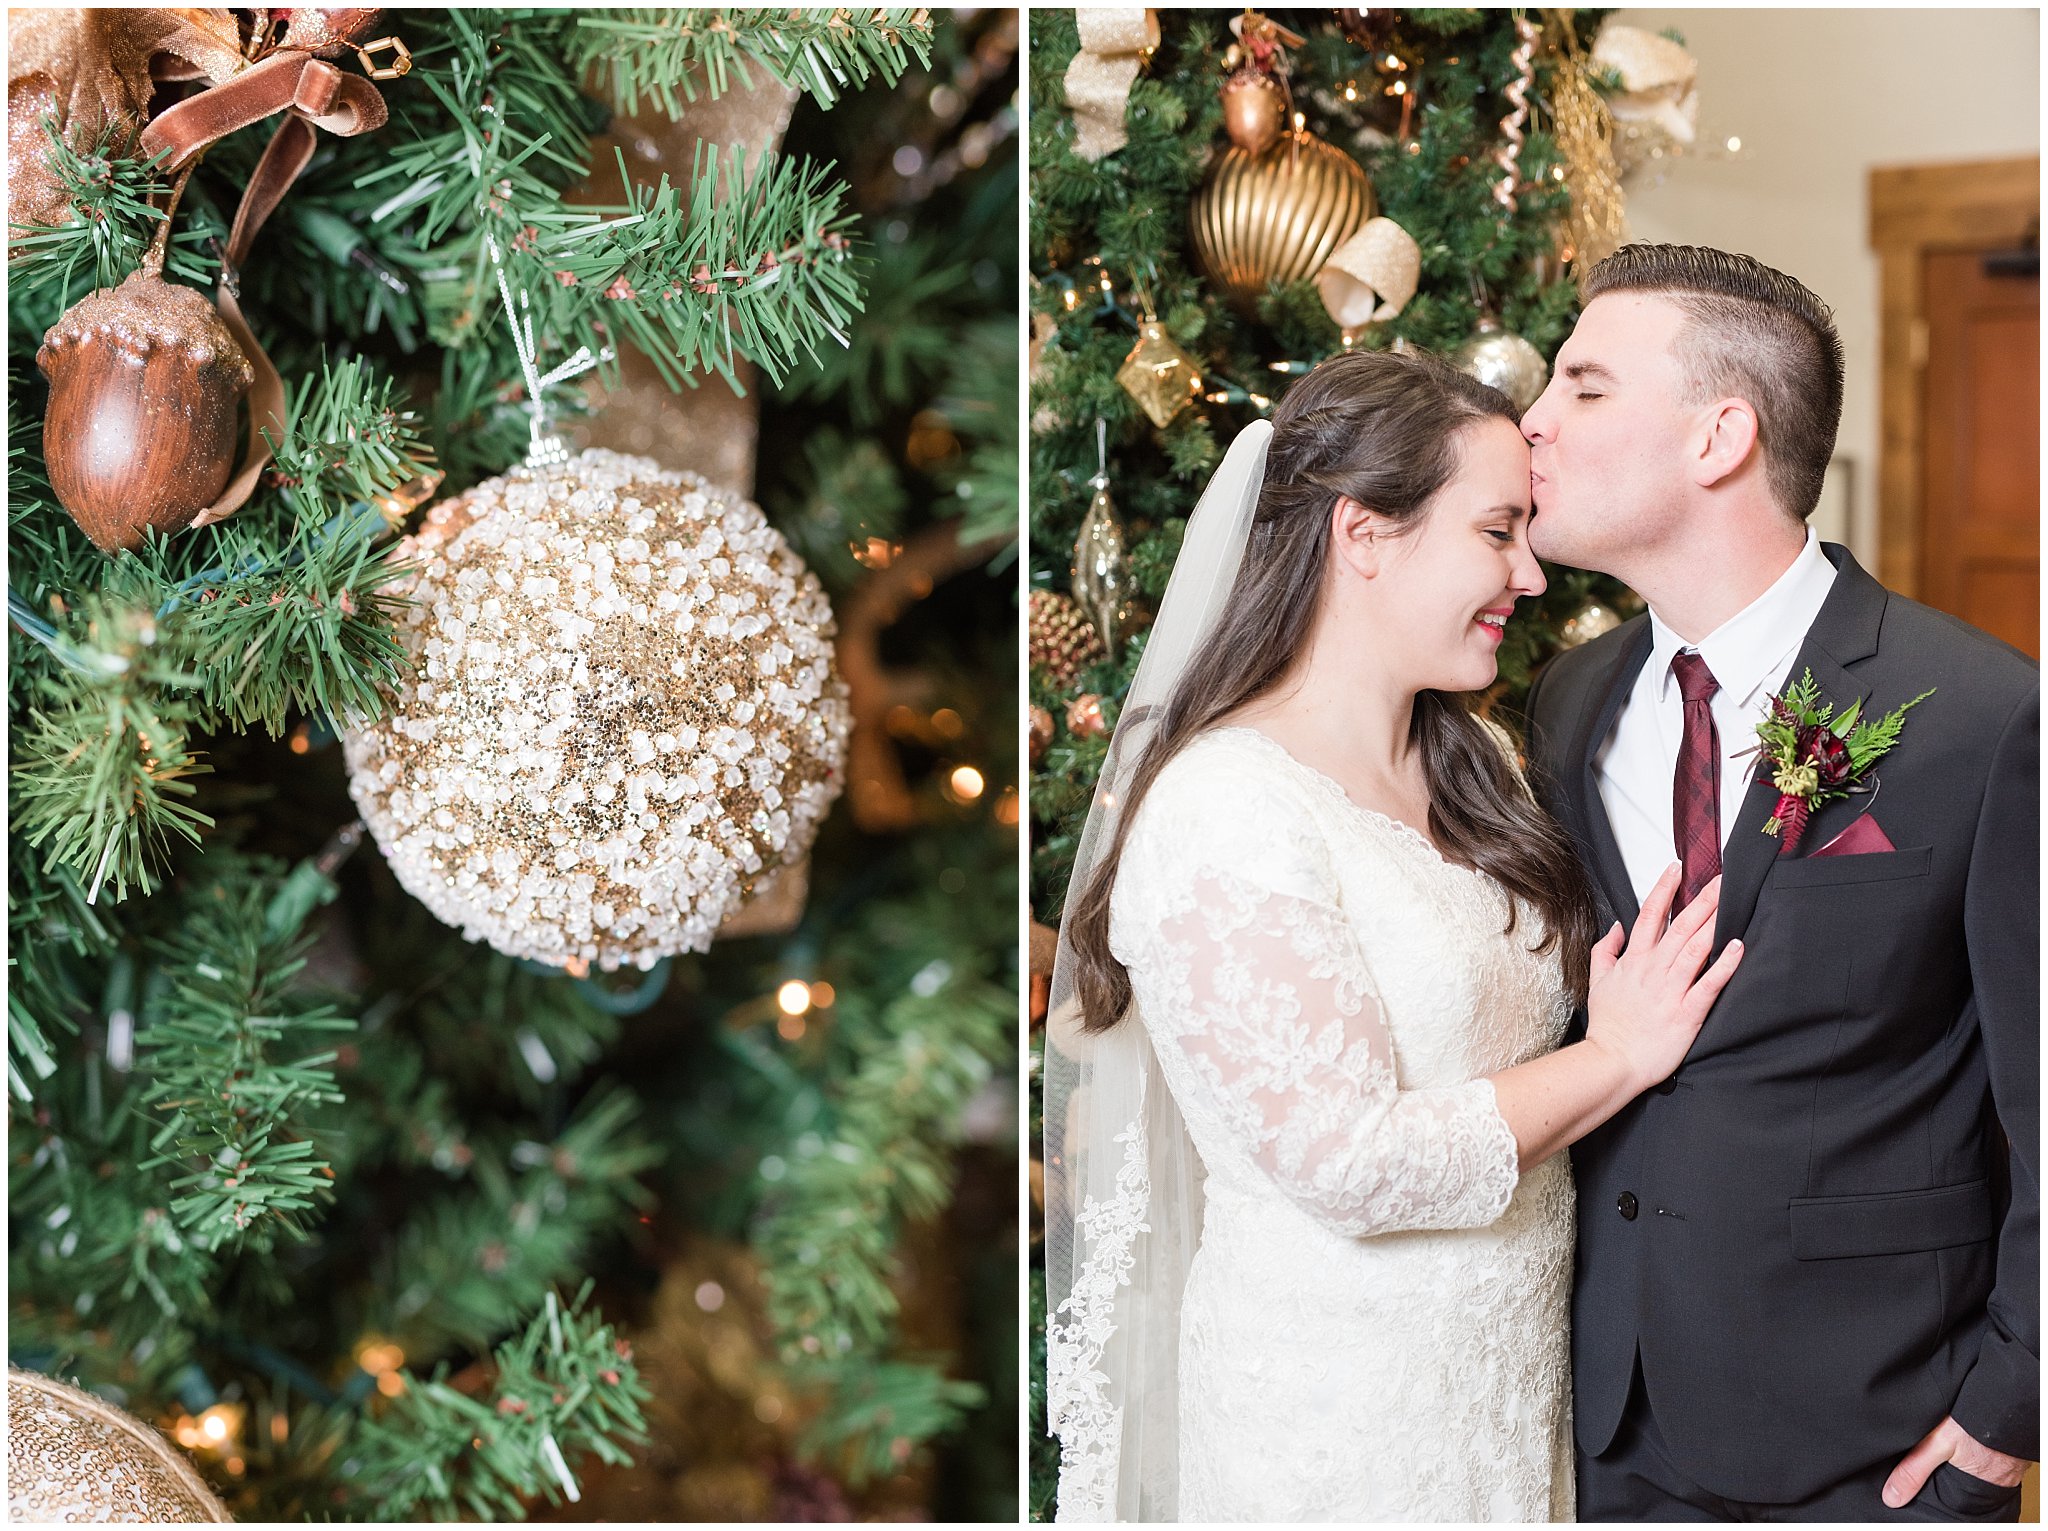 Bride and groom in front of Christmas Tree at the Gathering Place at Gardner Village | Oquirrh Mountain Temple and Gardner Village Wedding | The Gathering Place | Jessie and Dallin Photography